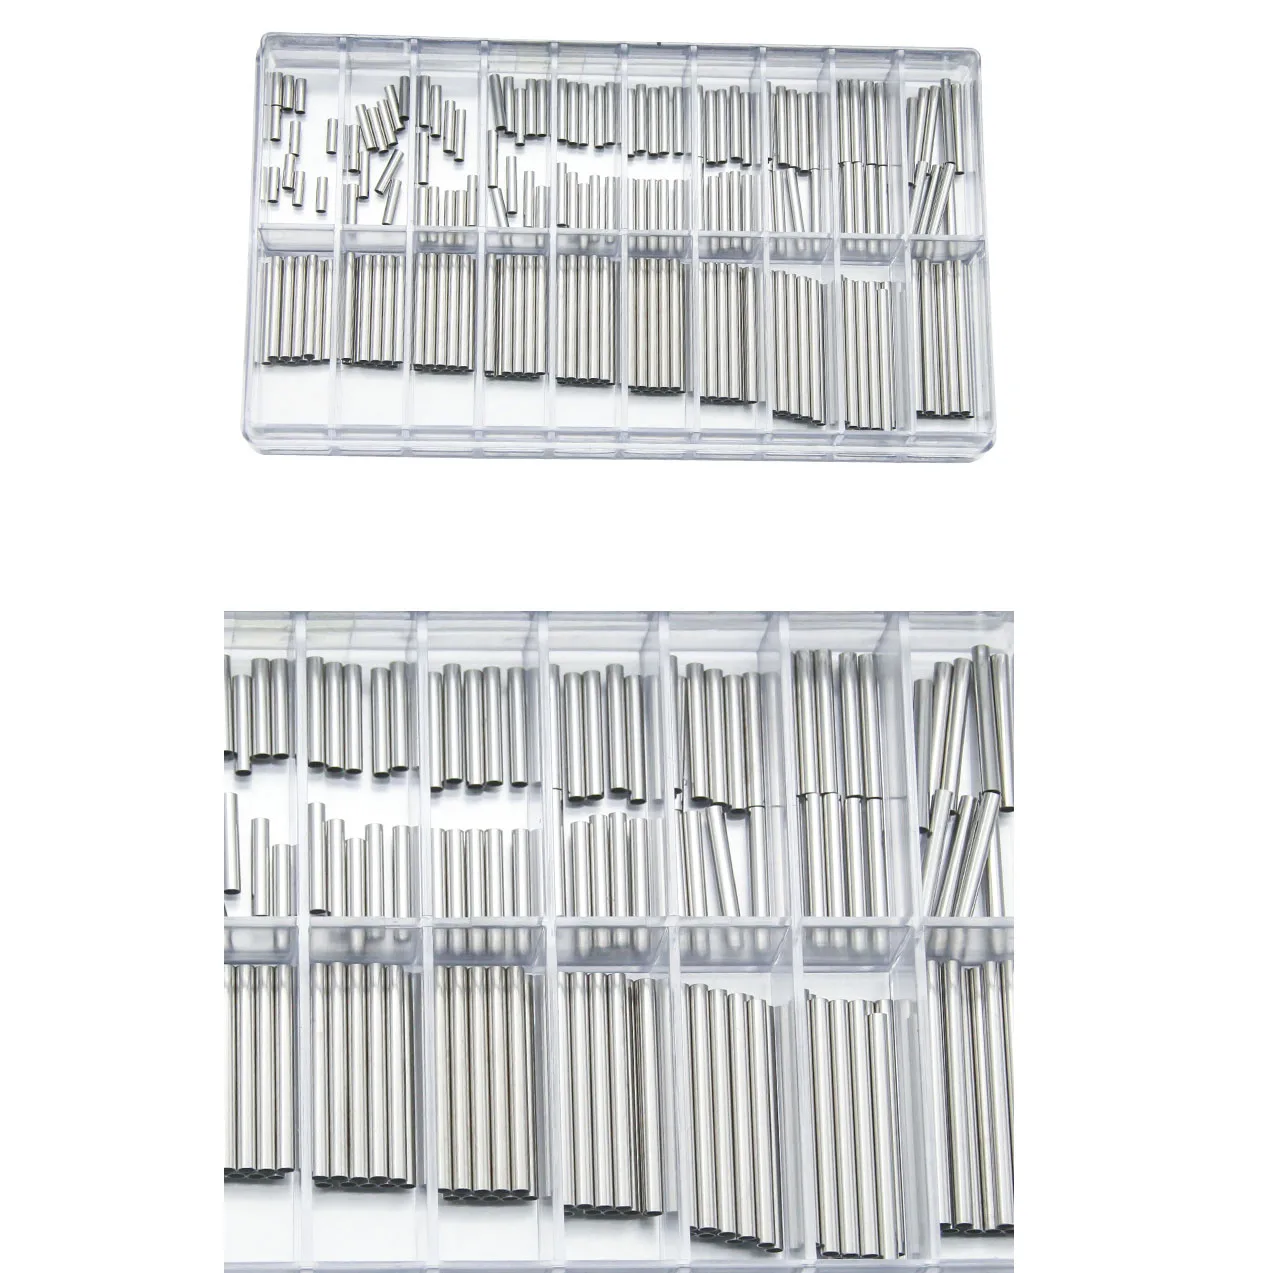 6-26mm Tube Watch Band Pins Bars Stainless Steel Pipe 120PCS Inner DIA 1.6mm Prevent Strap Interface Breakage Protective Pipe images - 6